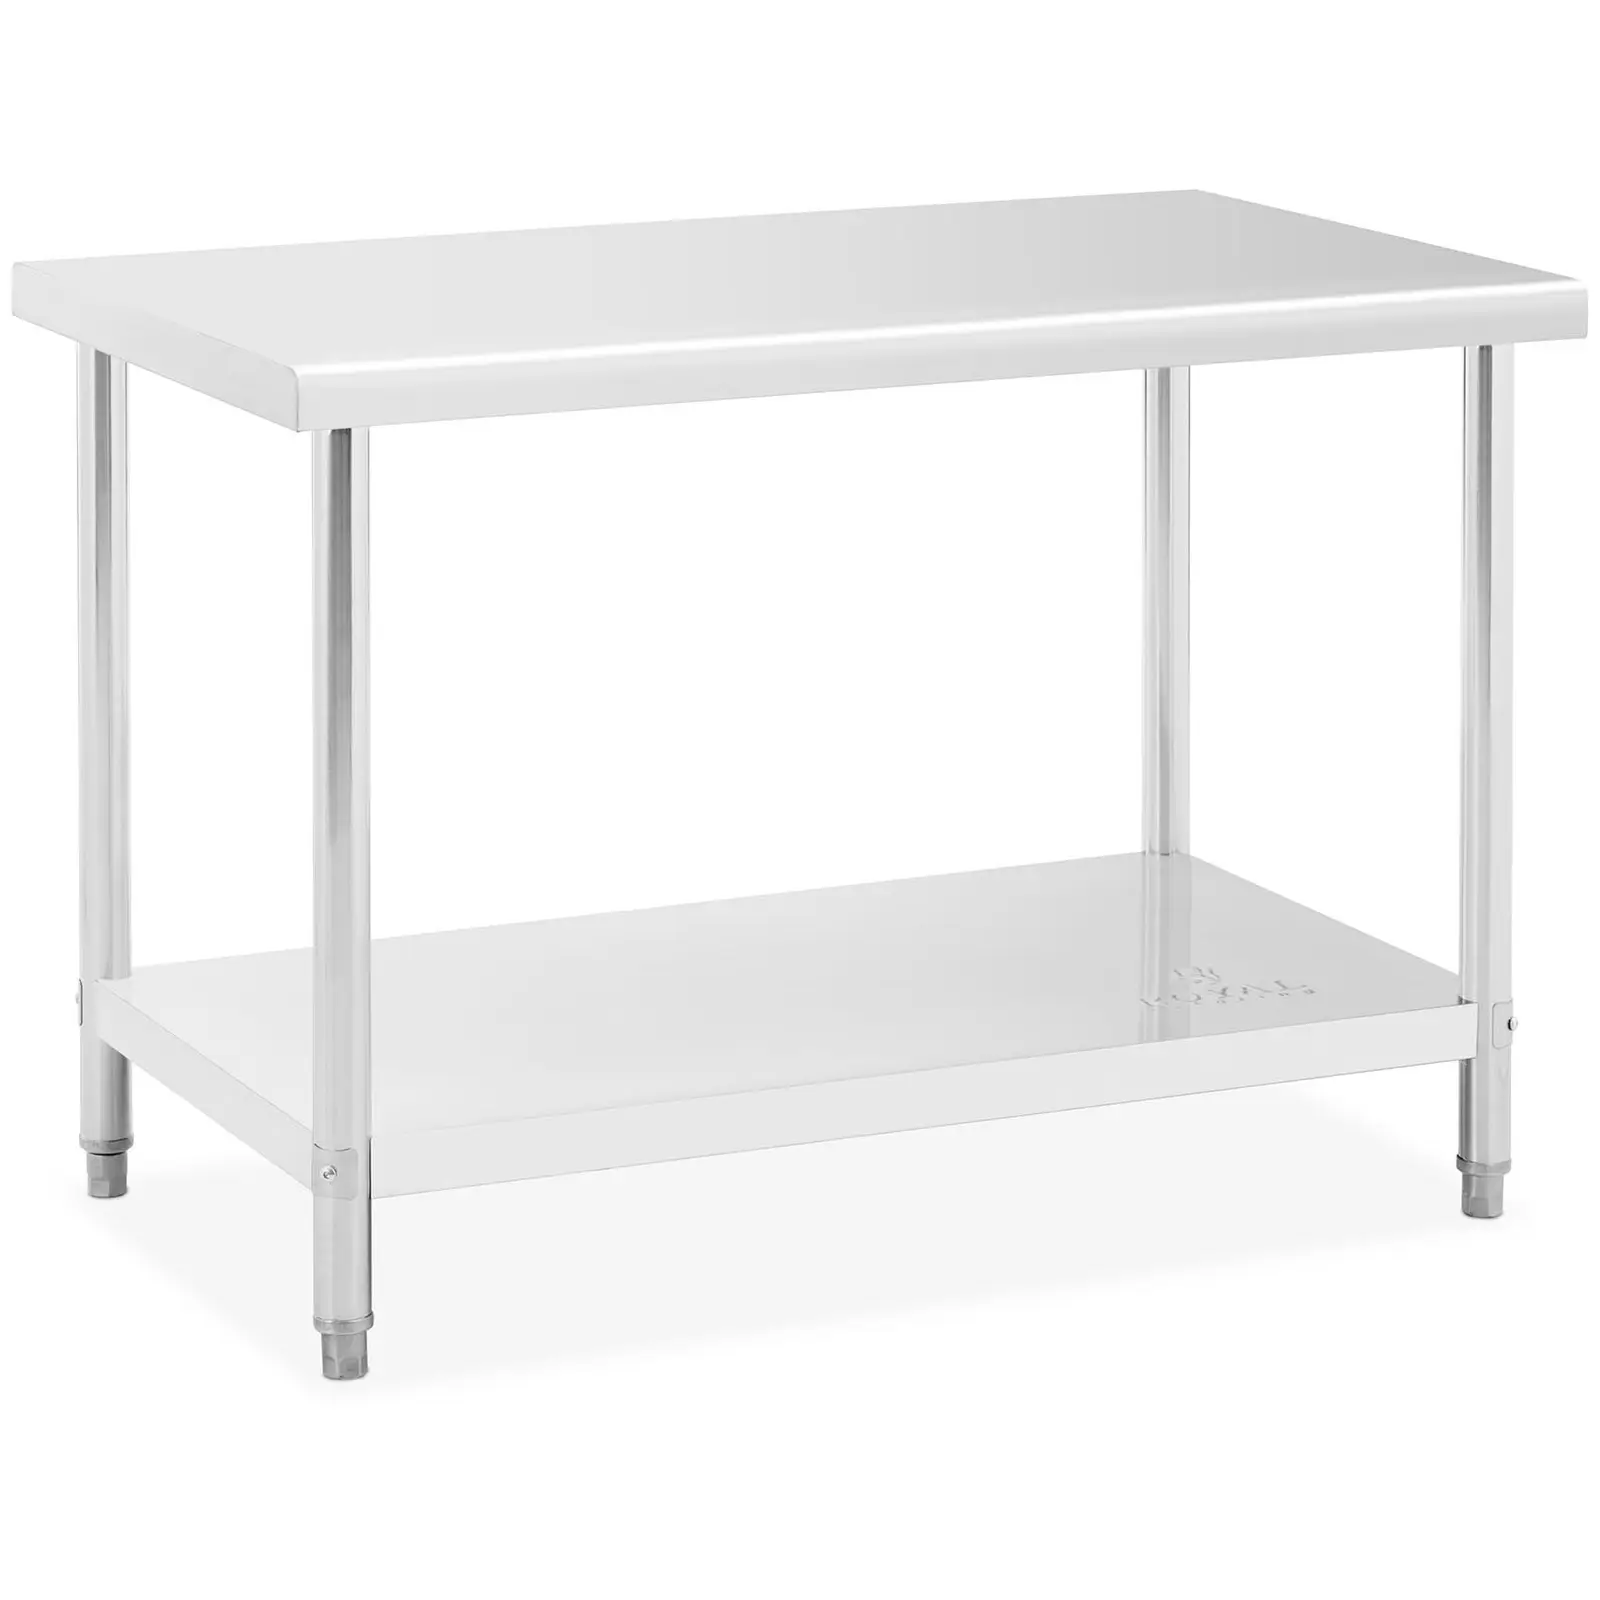 Stainless Steel Table - 120 x 70 cm - 115 kg capacity